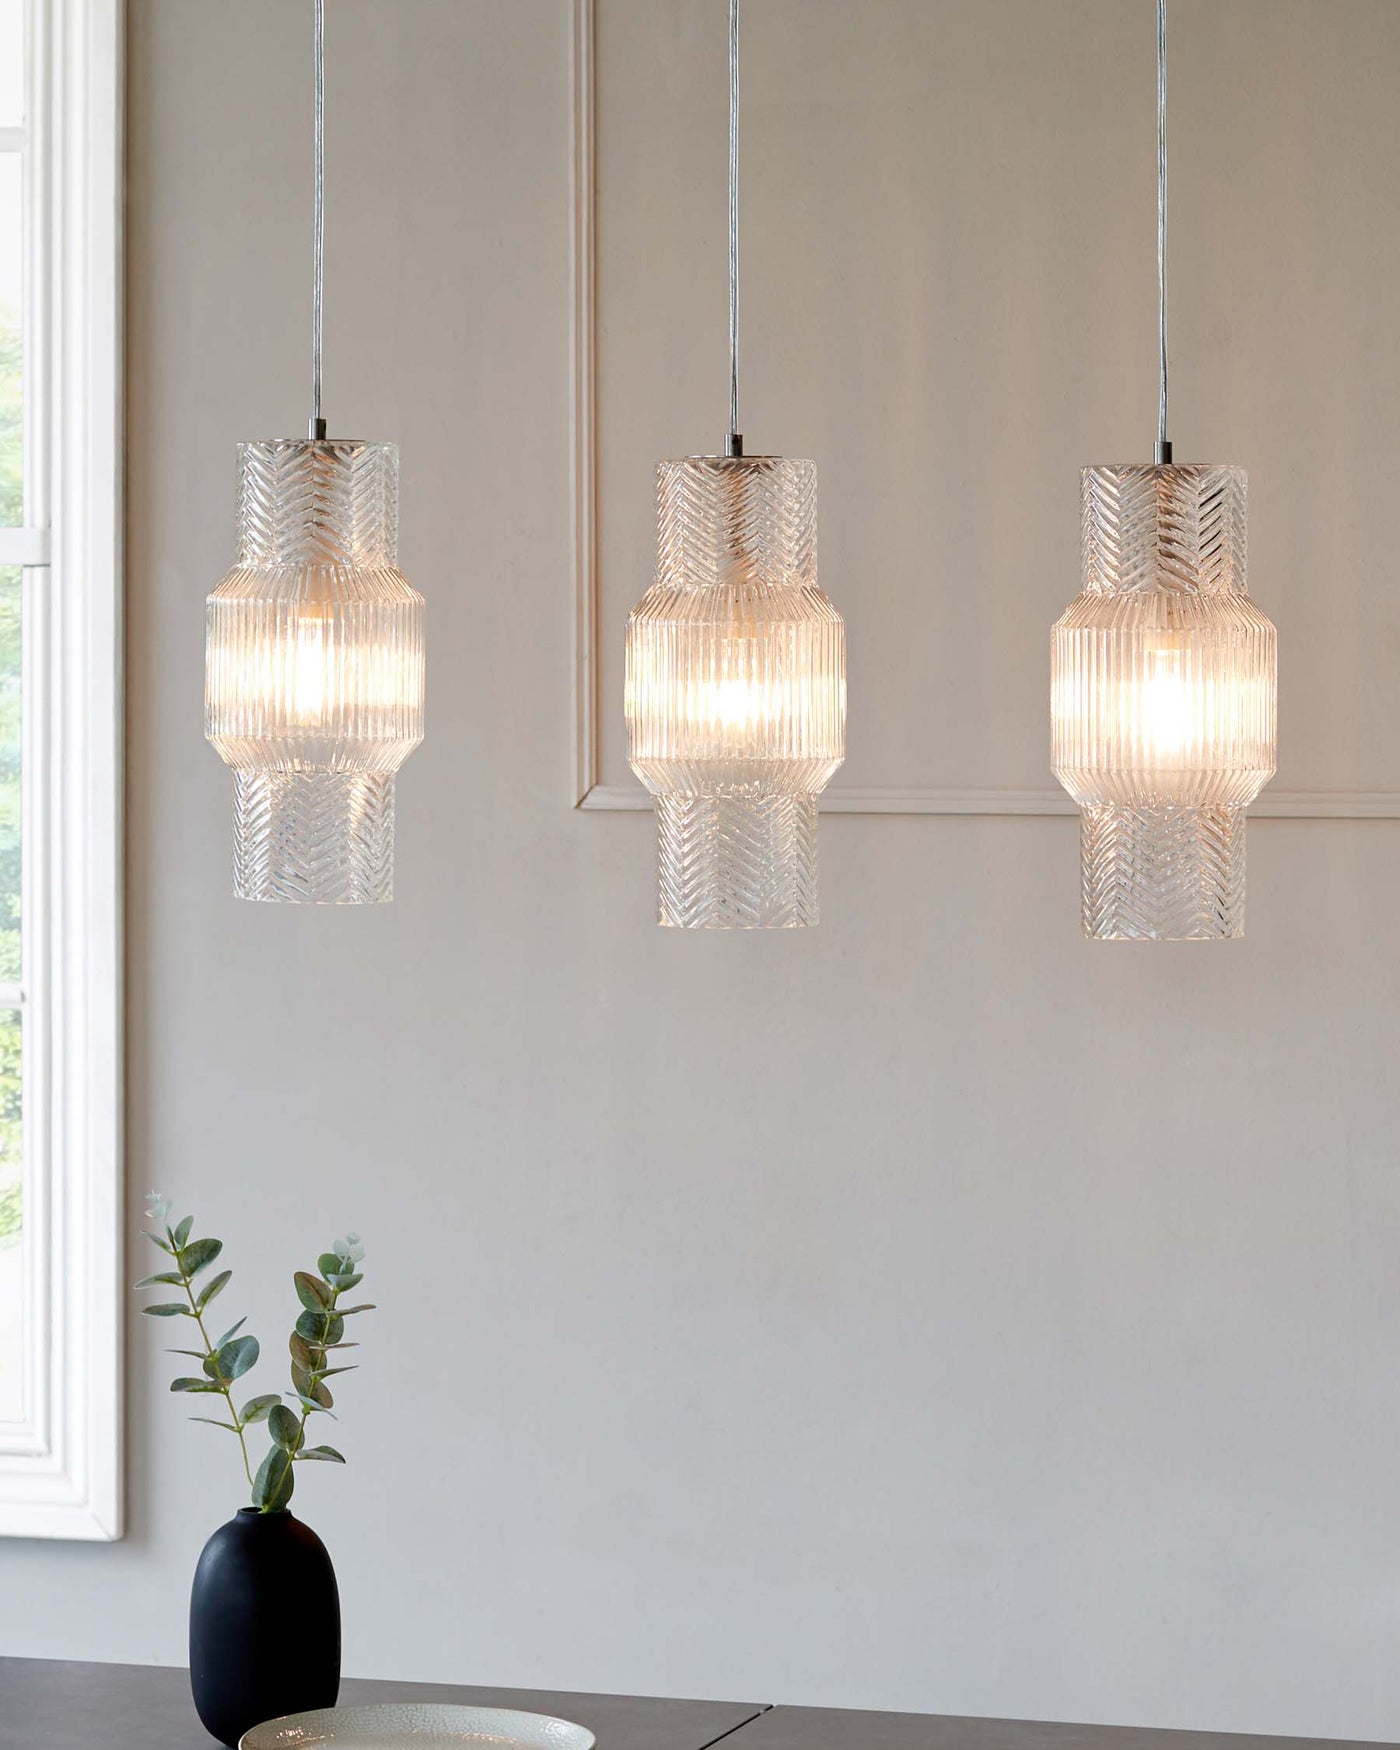 Three textured glass pendant lights hanging in a line above a minimalist dining table with a small black vase and green branches as the centrepiece.